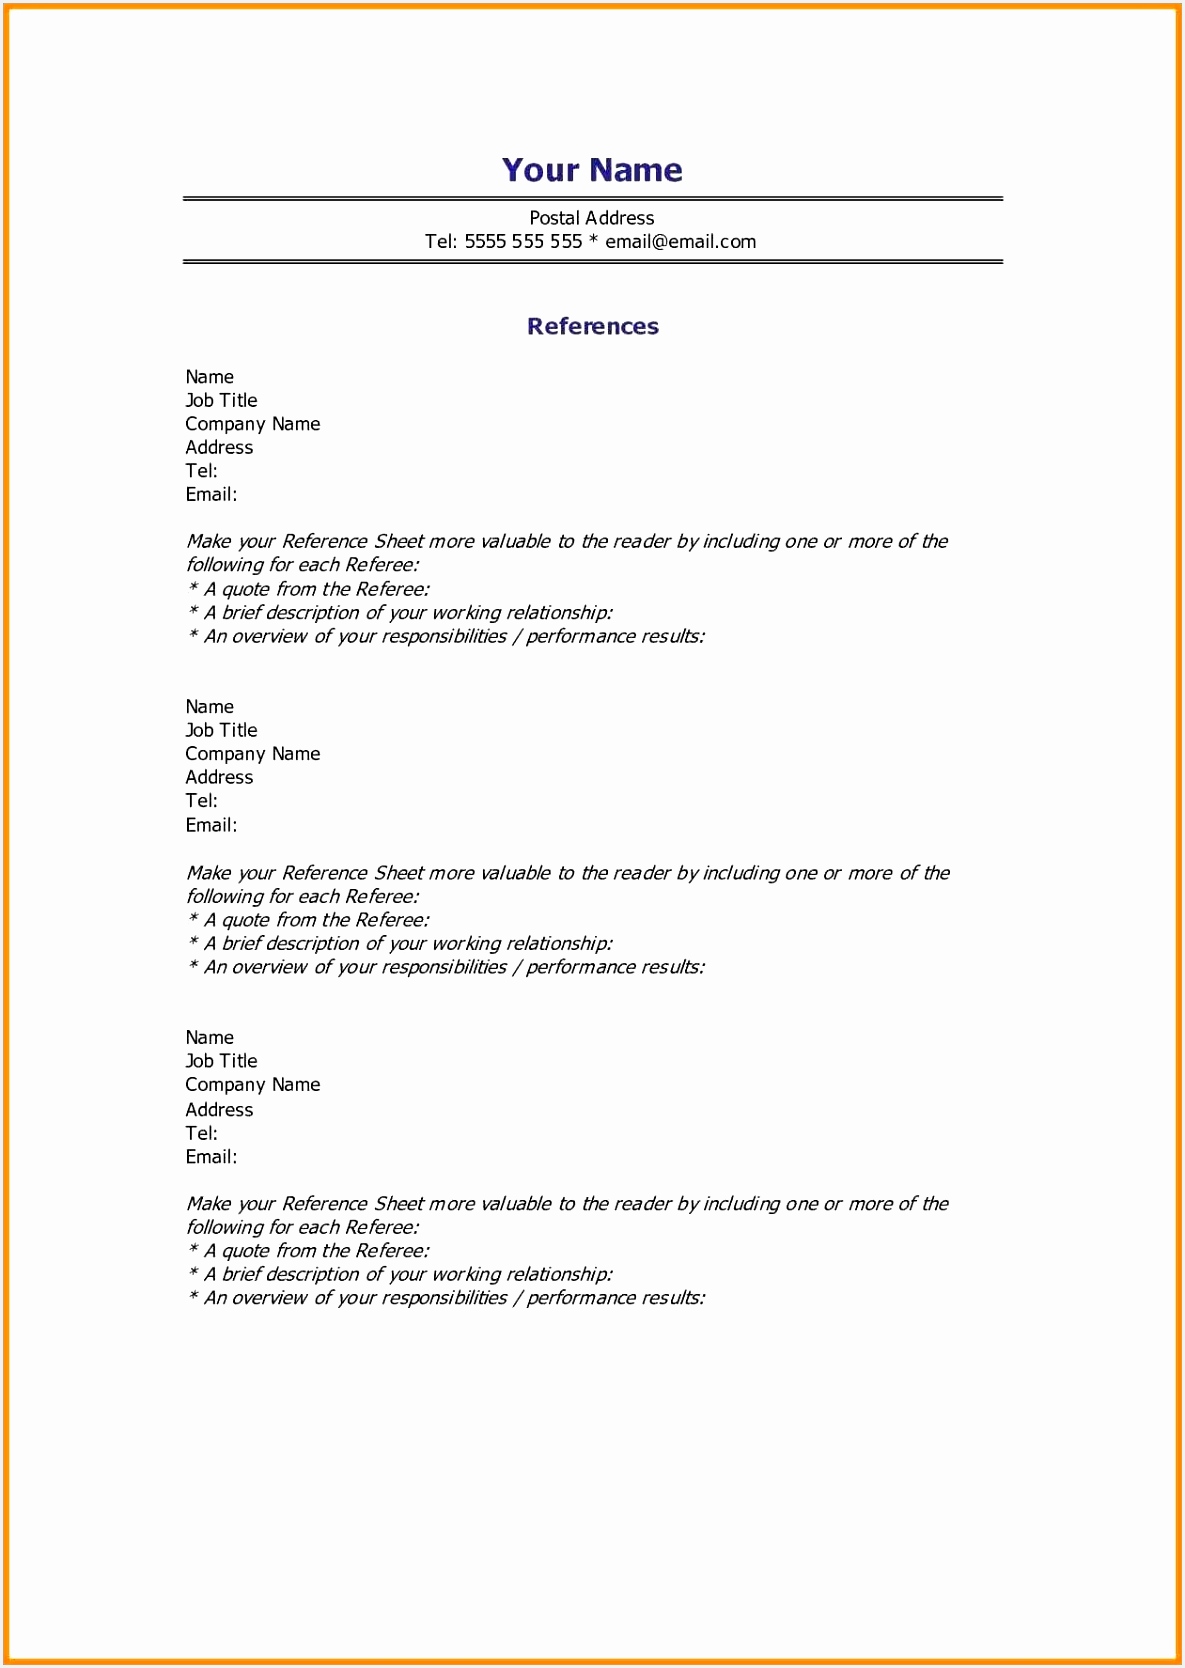 Reference Sheet For Resume Template 16681185dwFzw